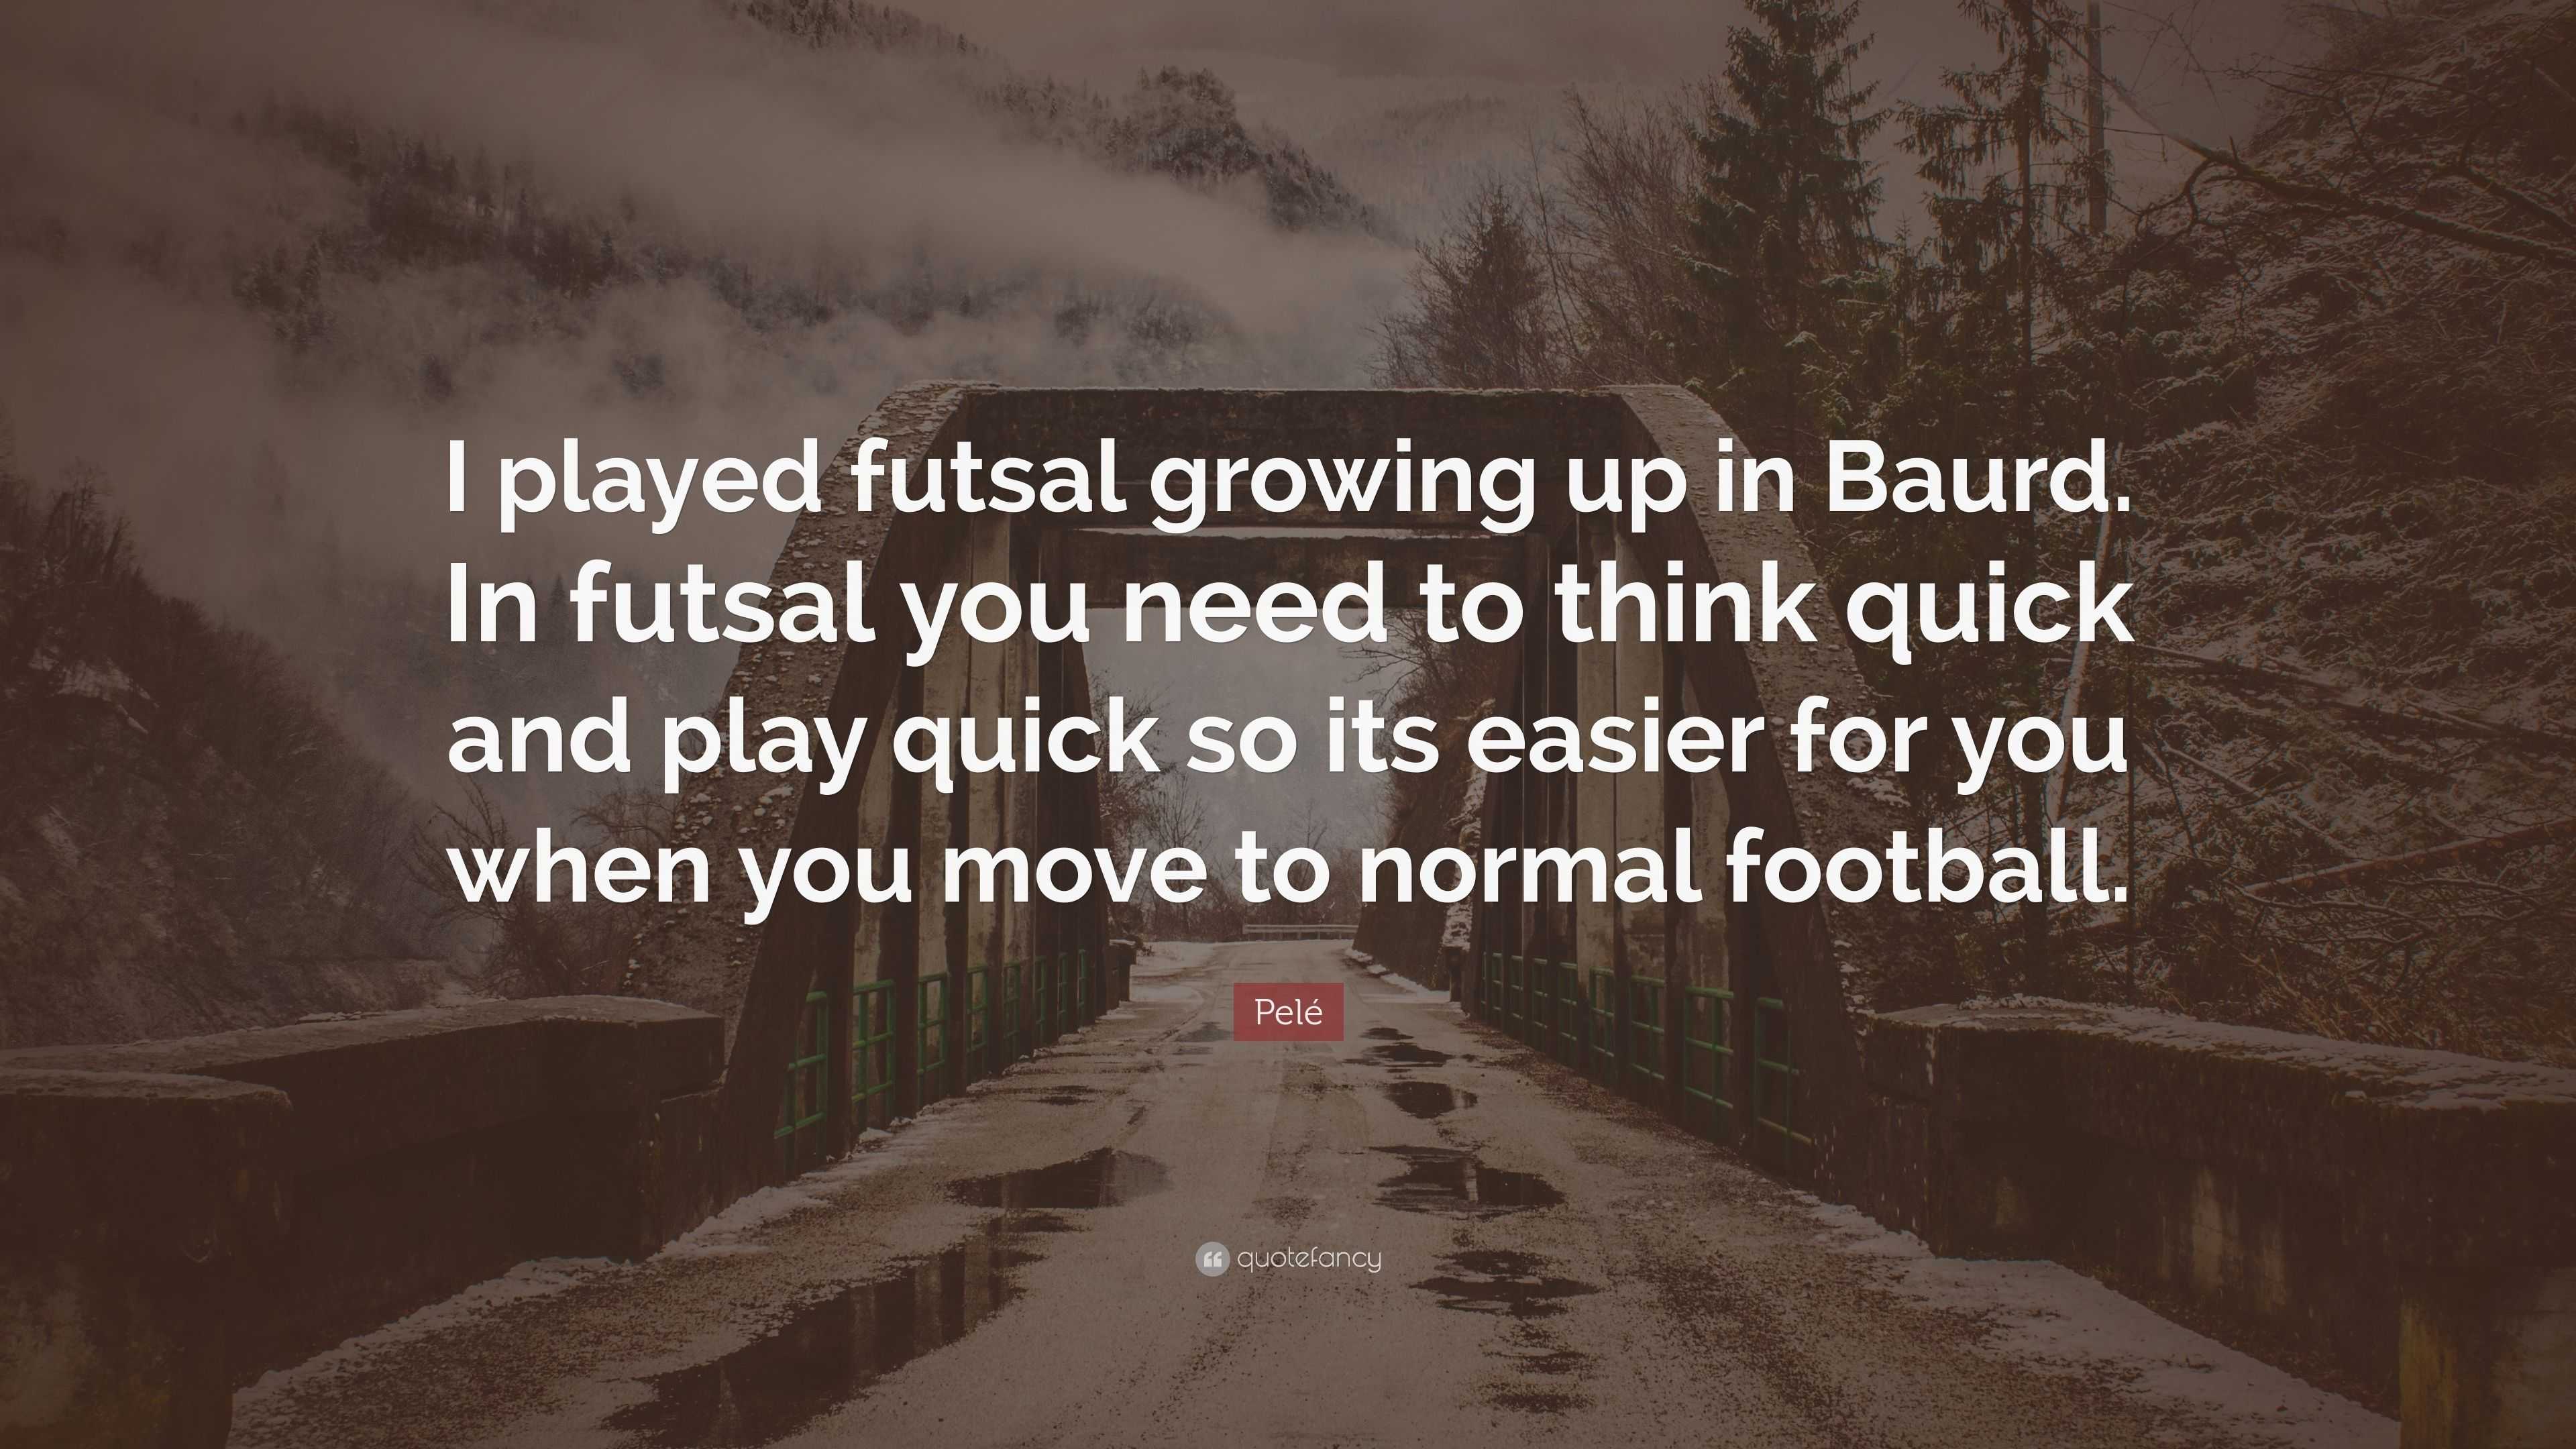 Pelé Quote: “I played futsal growing up in Baurd. In futsal you need to